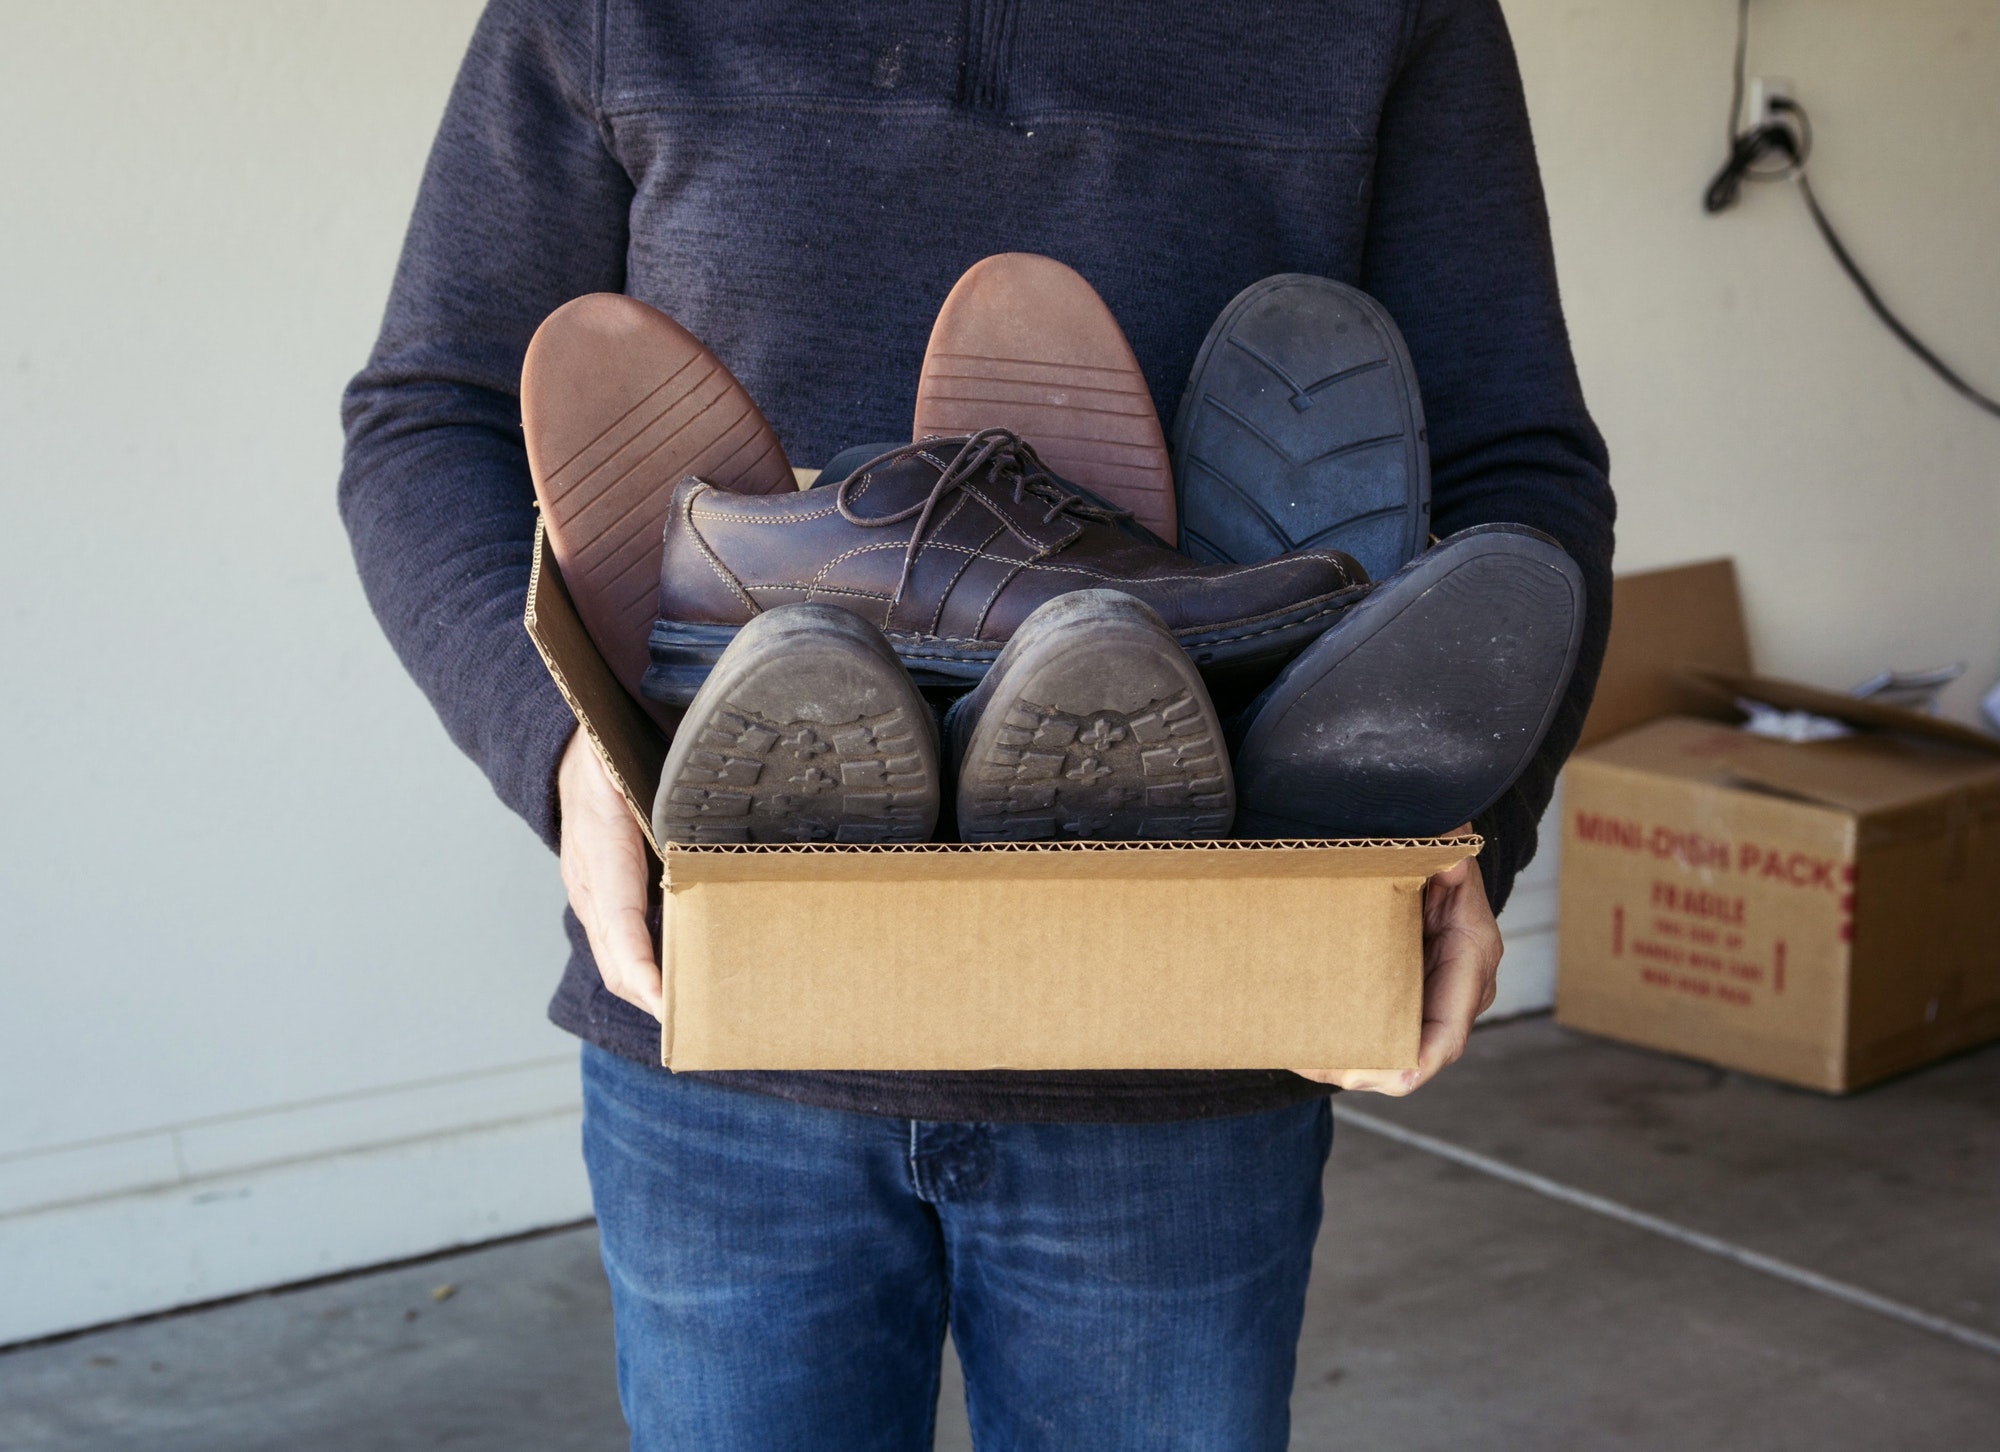 Adult male carrying a box of gently used shoes being donated to a charity organization for resale